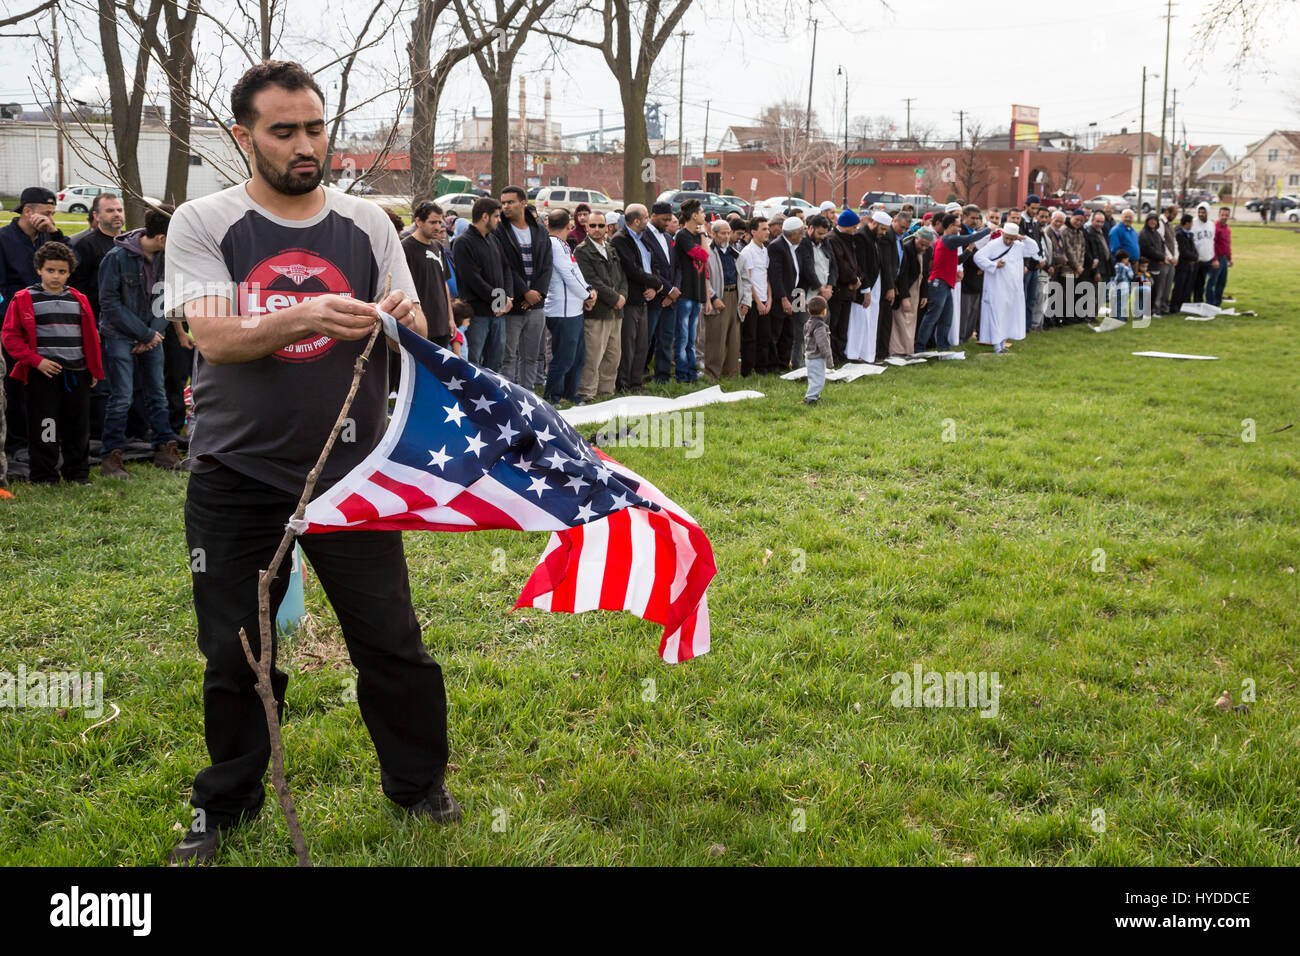 Dearborn, Michigan - A man fixes a flag as Muslim men prepare to pray in a park near the American Muslim Society's mosque. The Friday prayers came at  Stock Photo